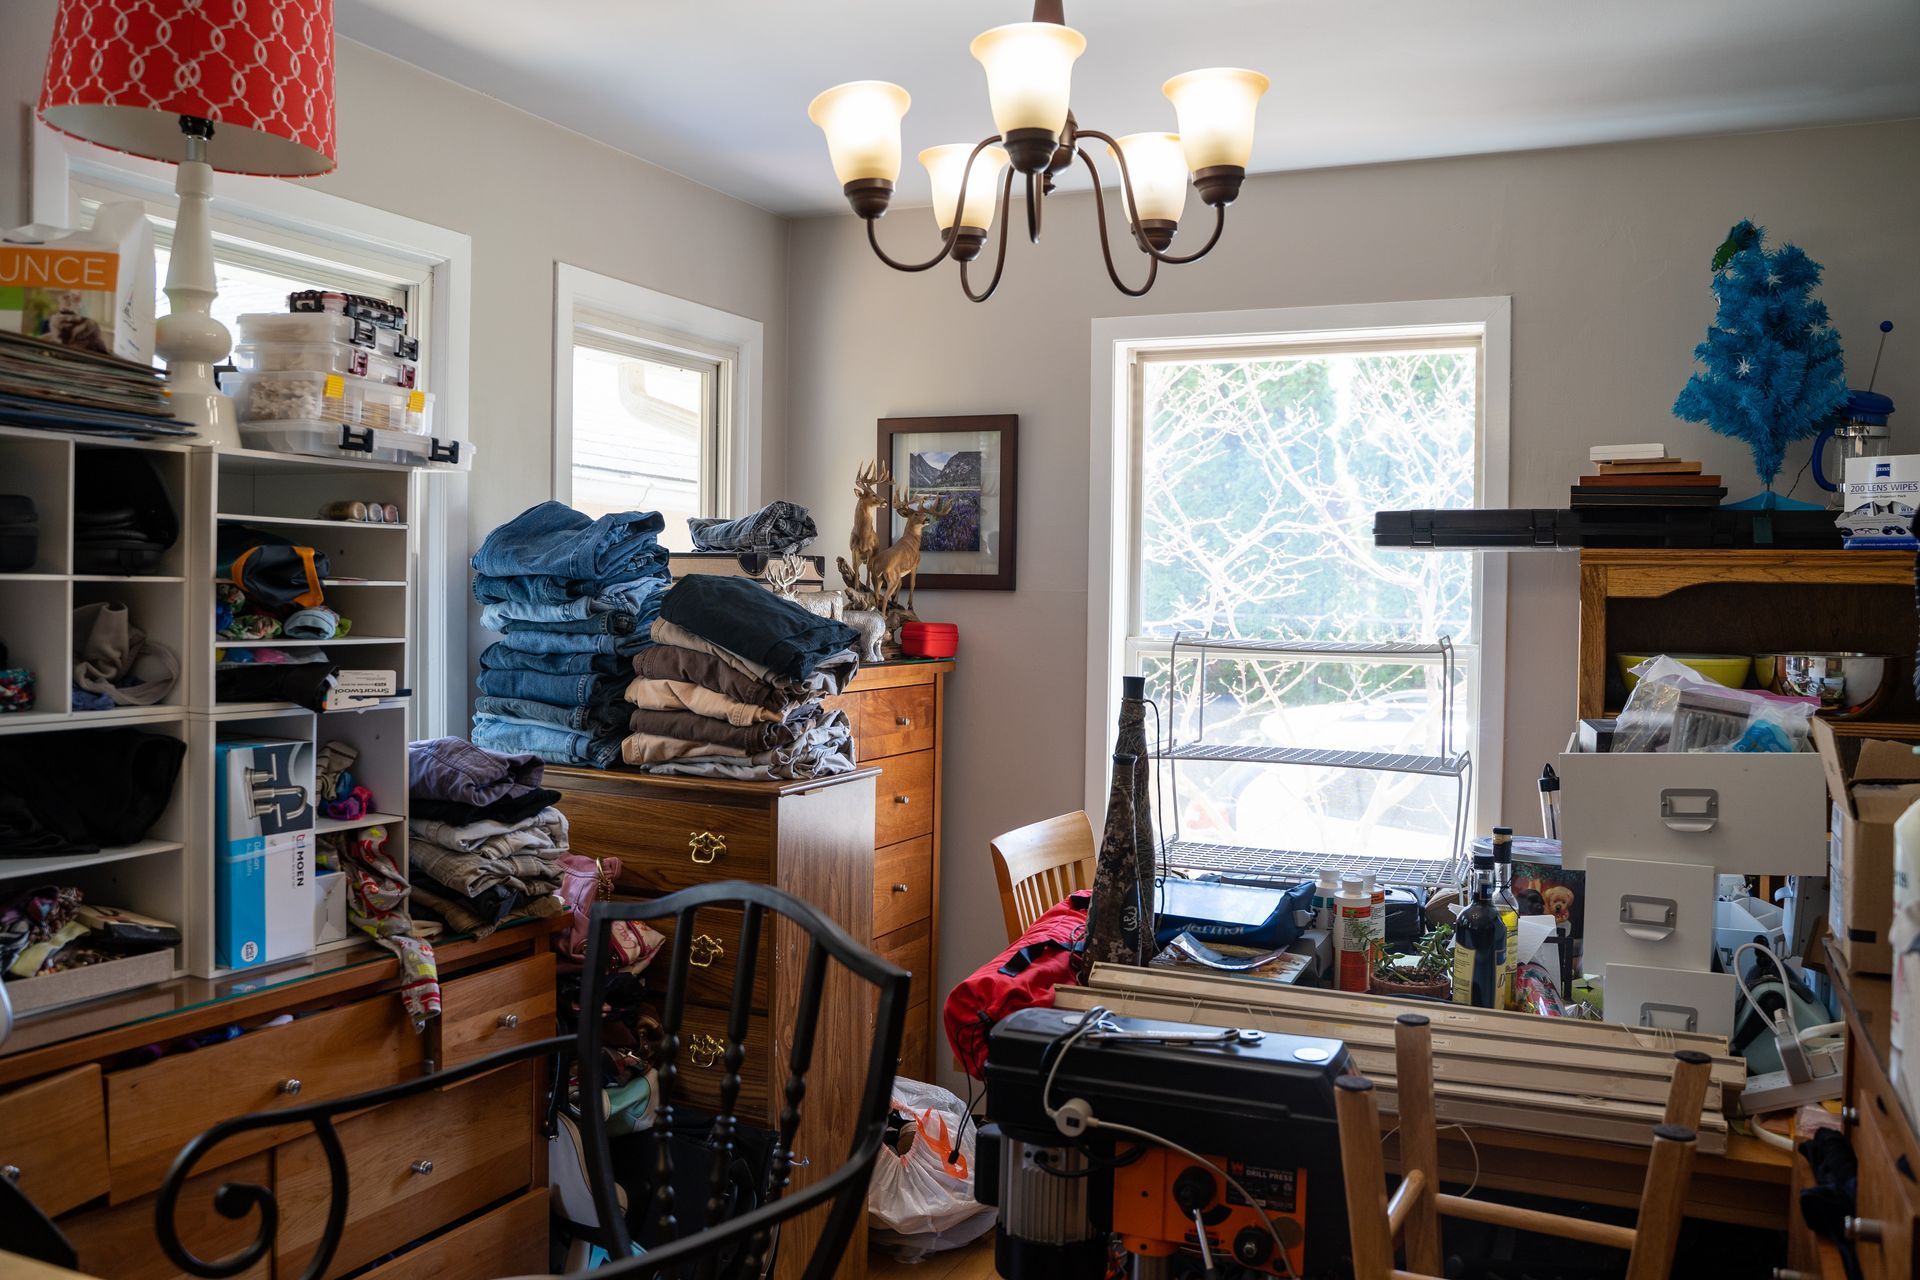 a cluttered room with a lamp that says ounce on it